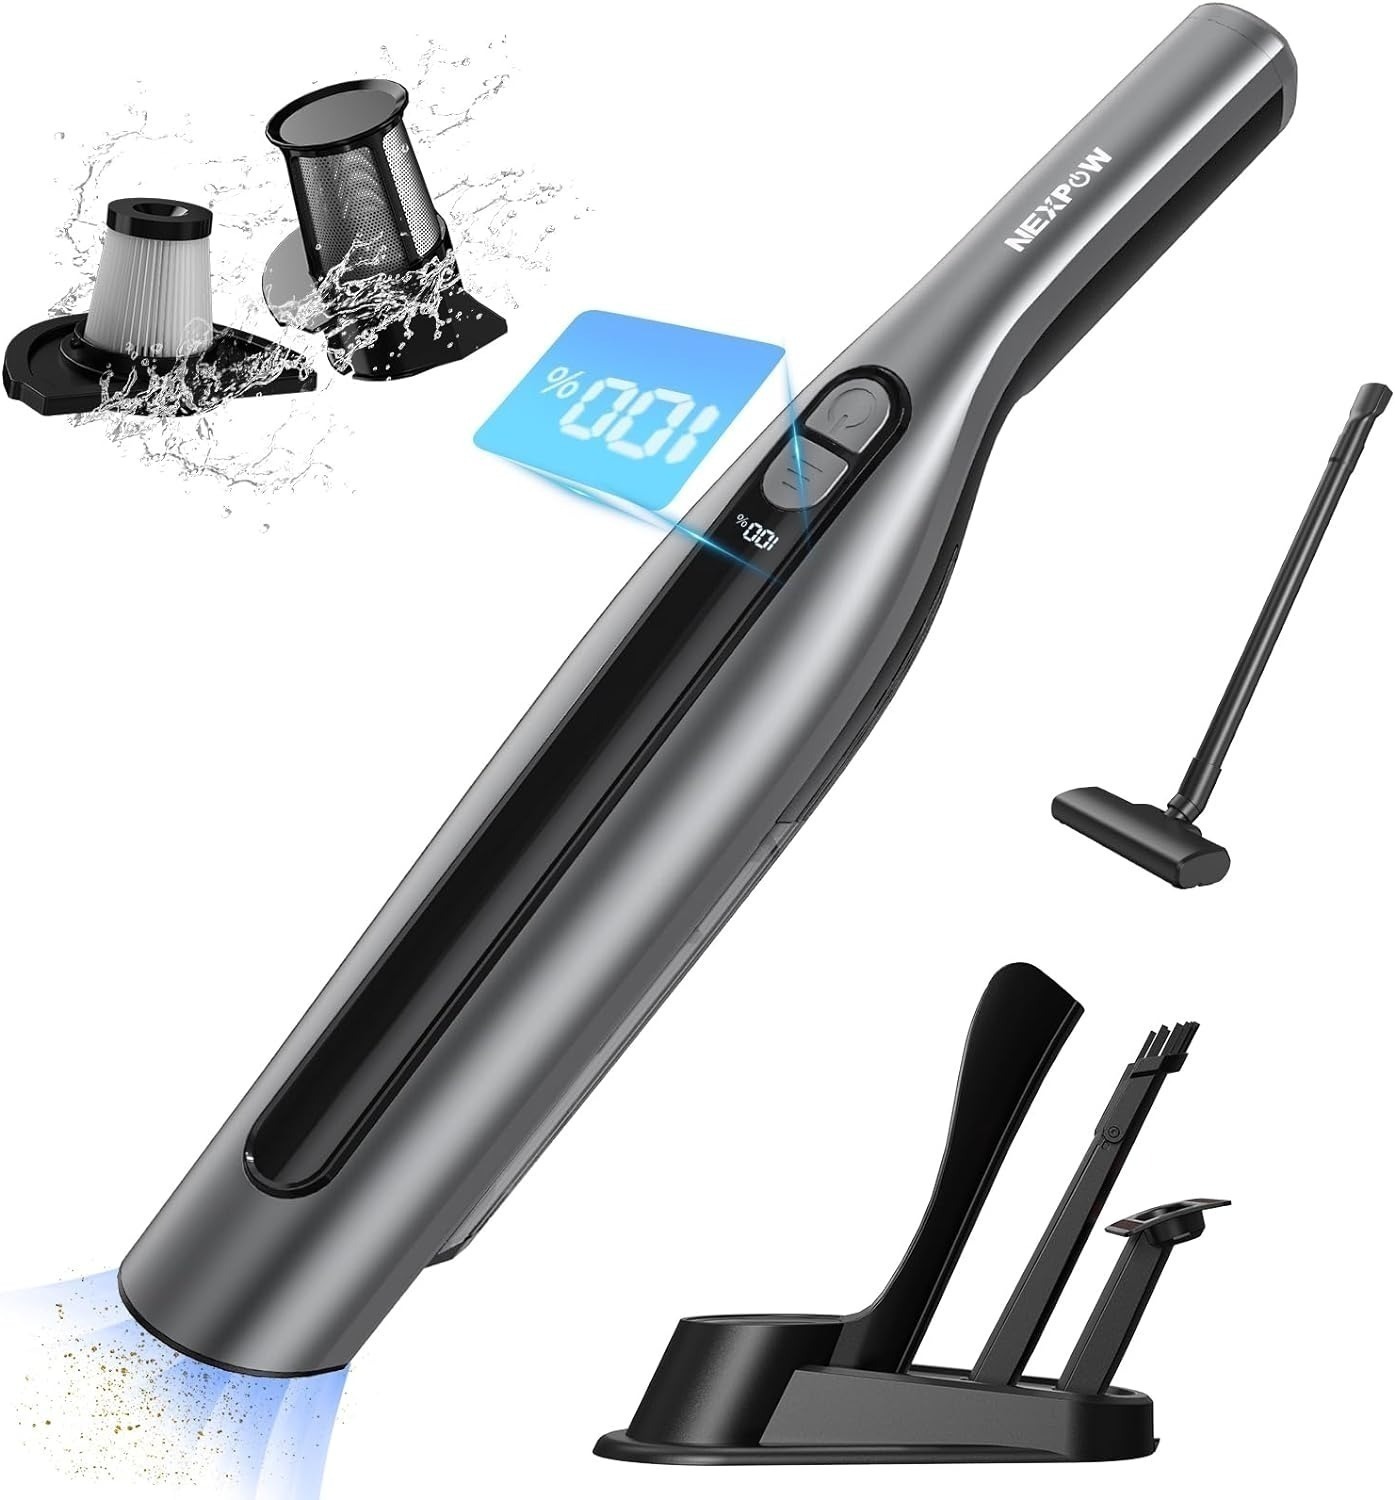 NEXPOW 18000PA Handheld Car Vacuum with 7500 mAh Battery $19.49 + Free Shipping w/Prime or $35+